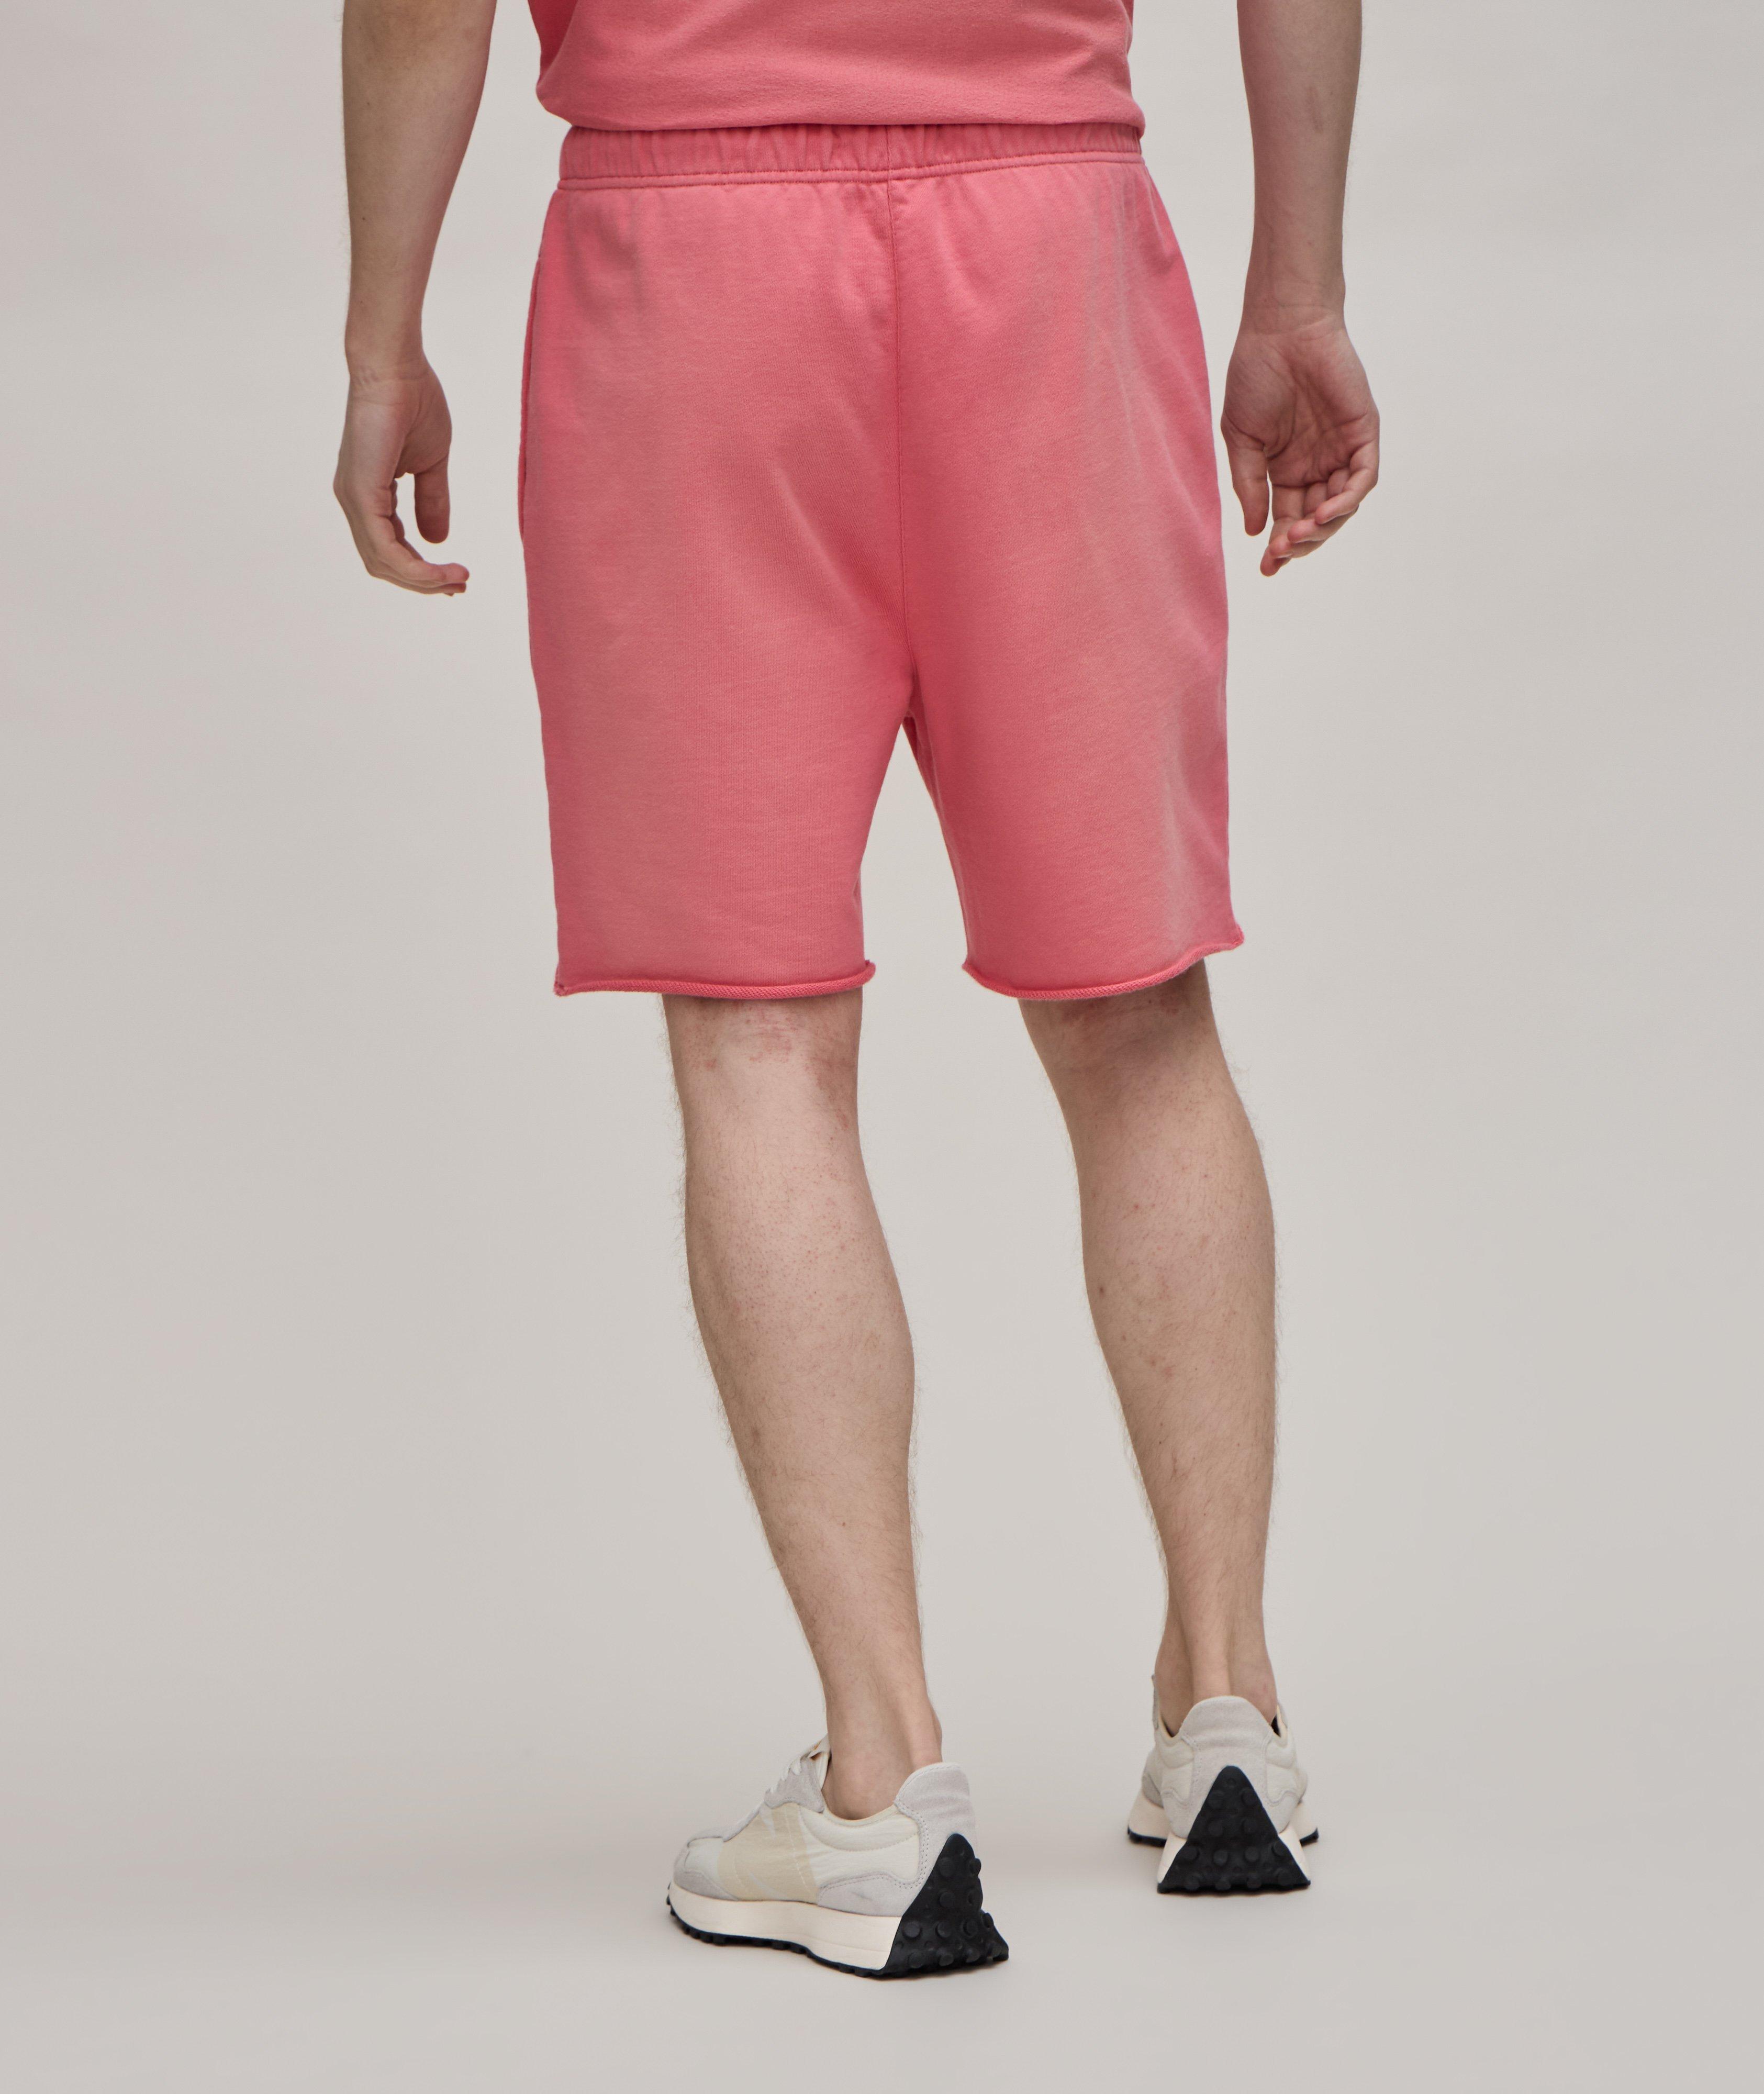 Terry Cotton Sweat Shorts  image 2